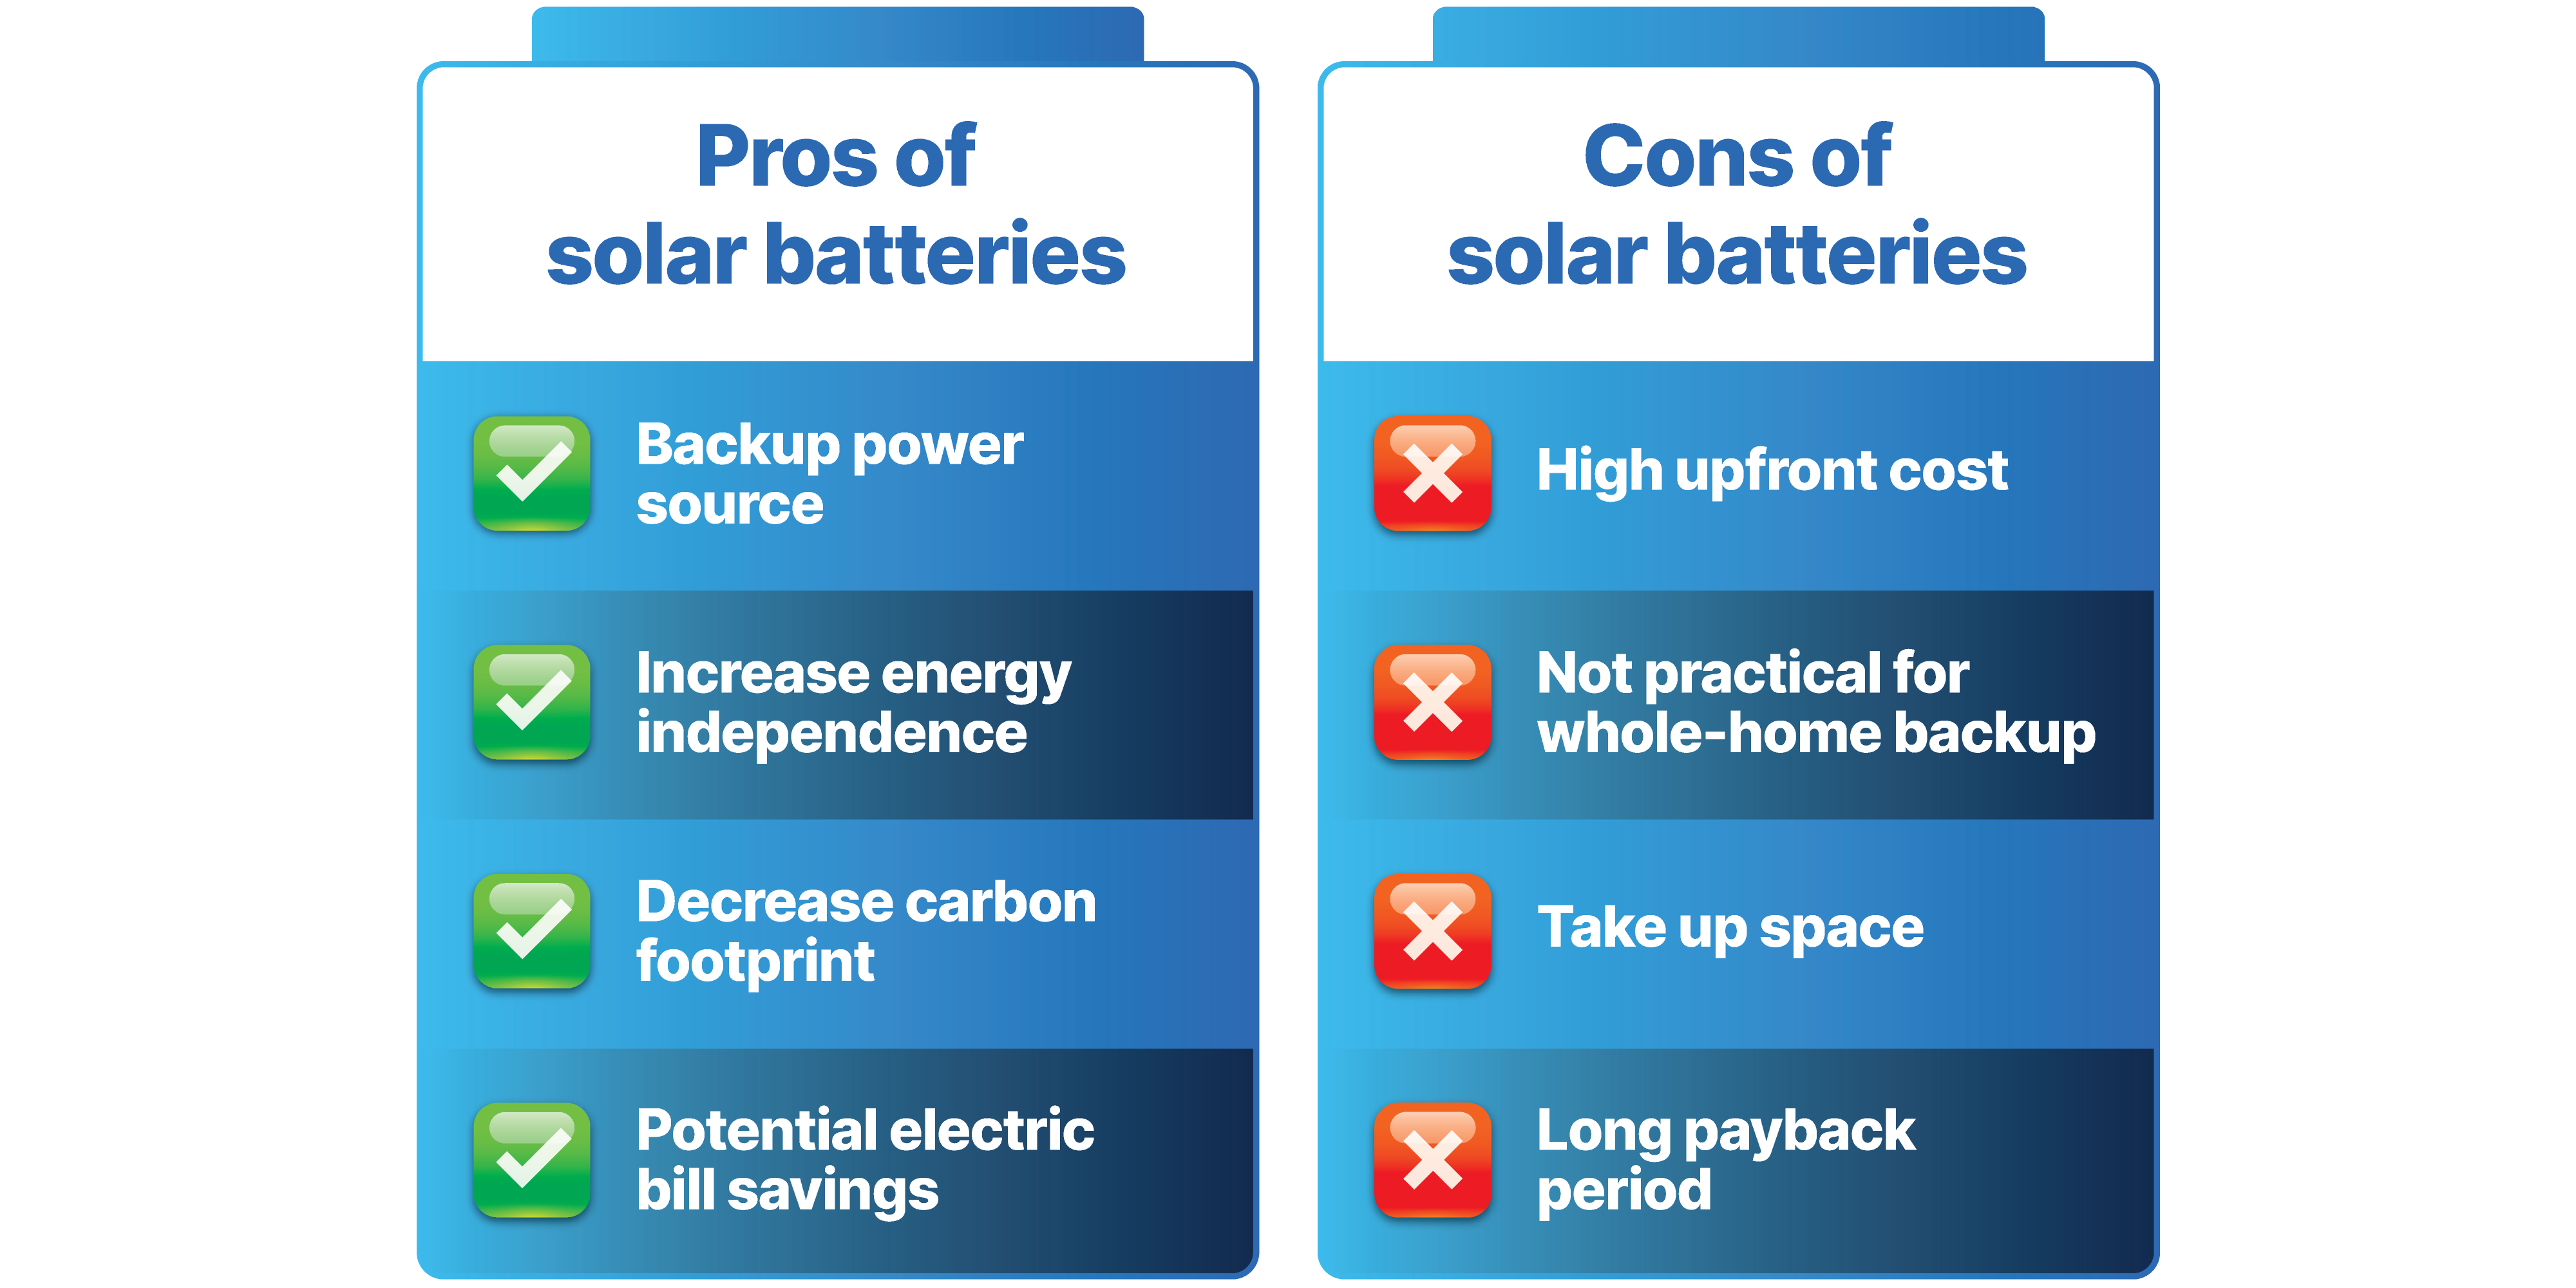 A graphic displaying the pros and cons of solar batteries. Pros of solar batteries: backup power source, increase energy independence, decrease carbon footprint, potential electric bill savings. Cons of solar batteries: High upfront costs, not practical for whole-home backup, take up space, long payback period.